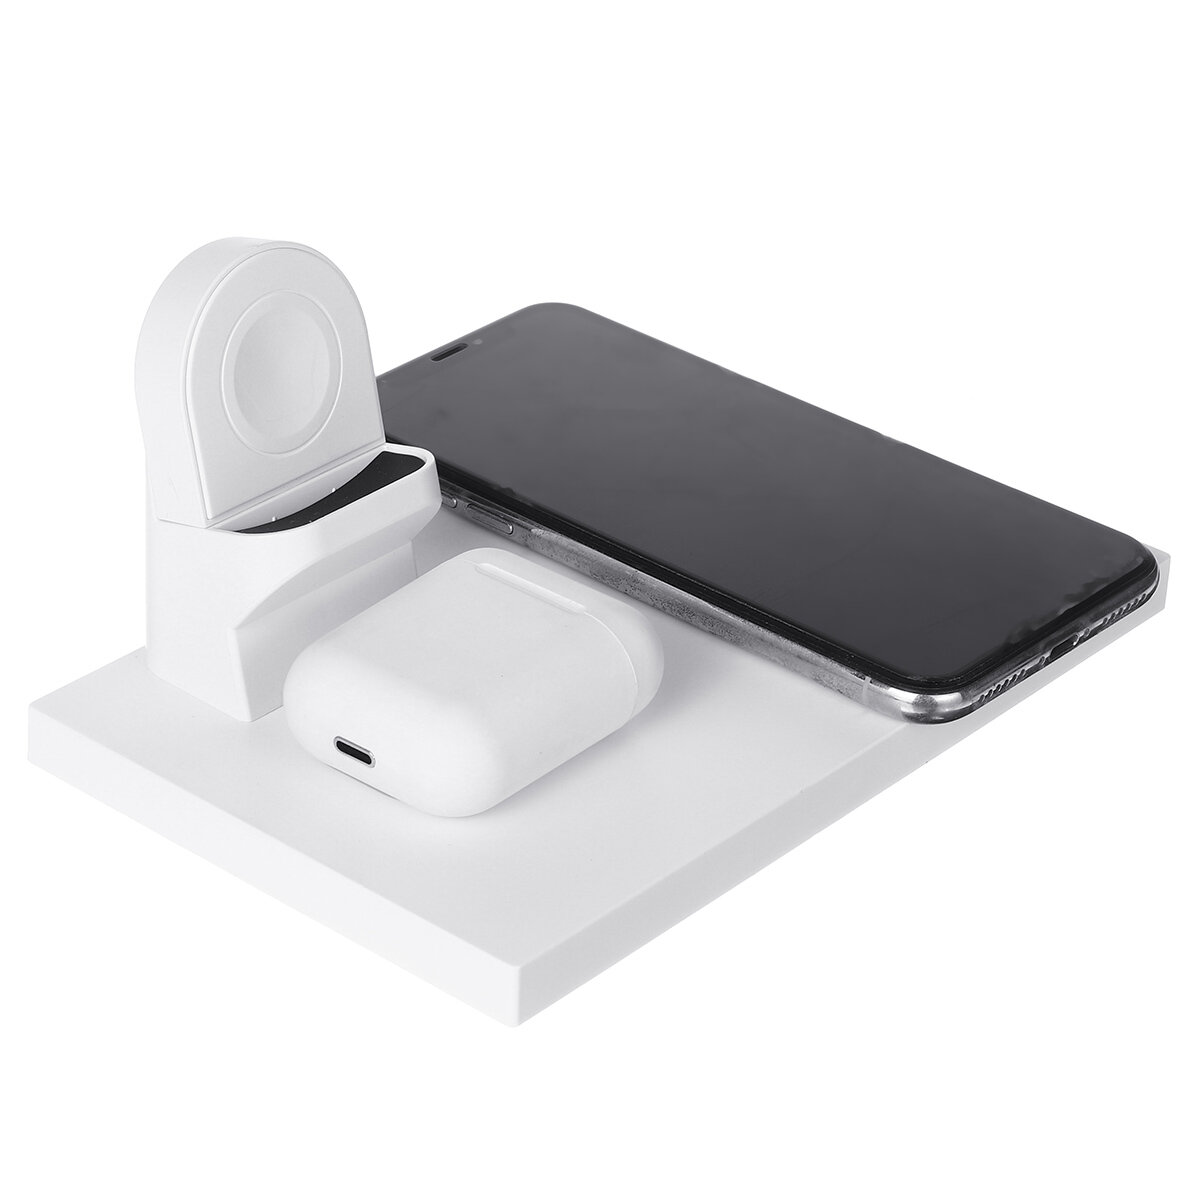 Bakeey 3 in 1 QI Wireless Charger Dock for Apple Watch for iPhone 12 Mini / 12 Pro/12 Pro Max for AirPods 2 Pro